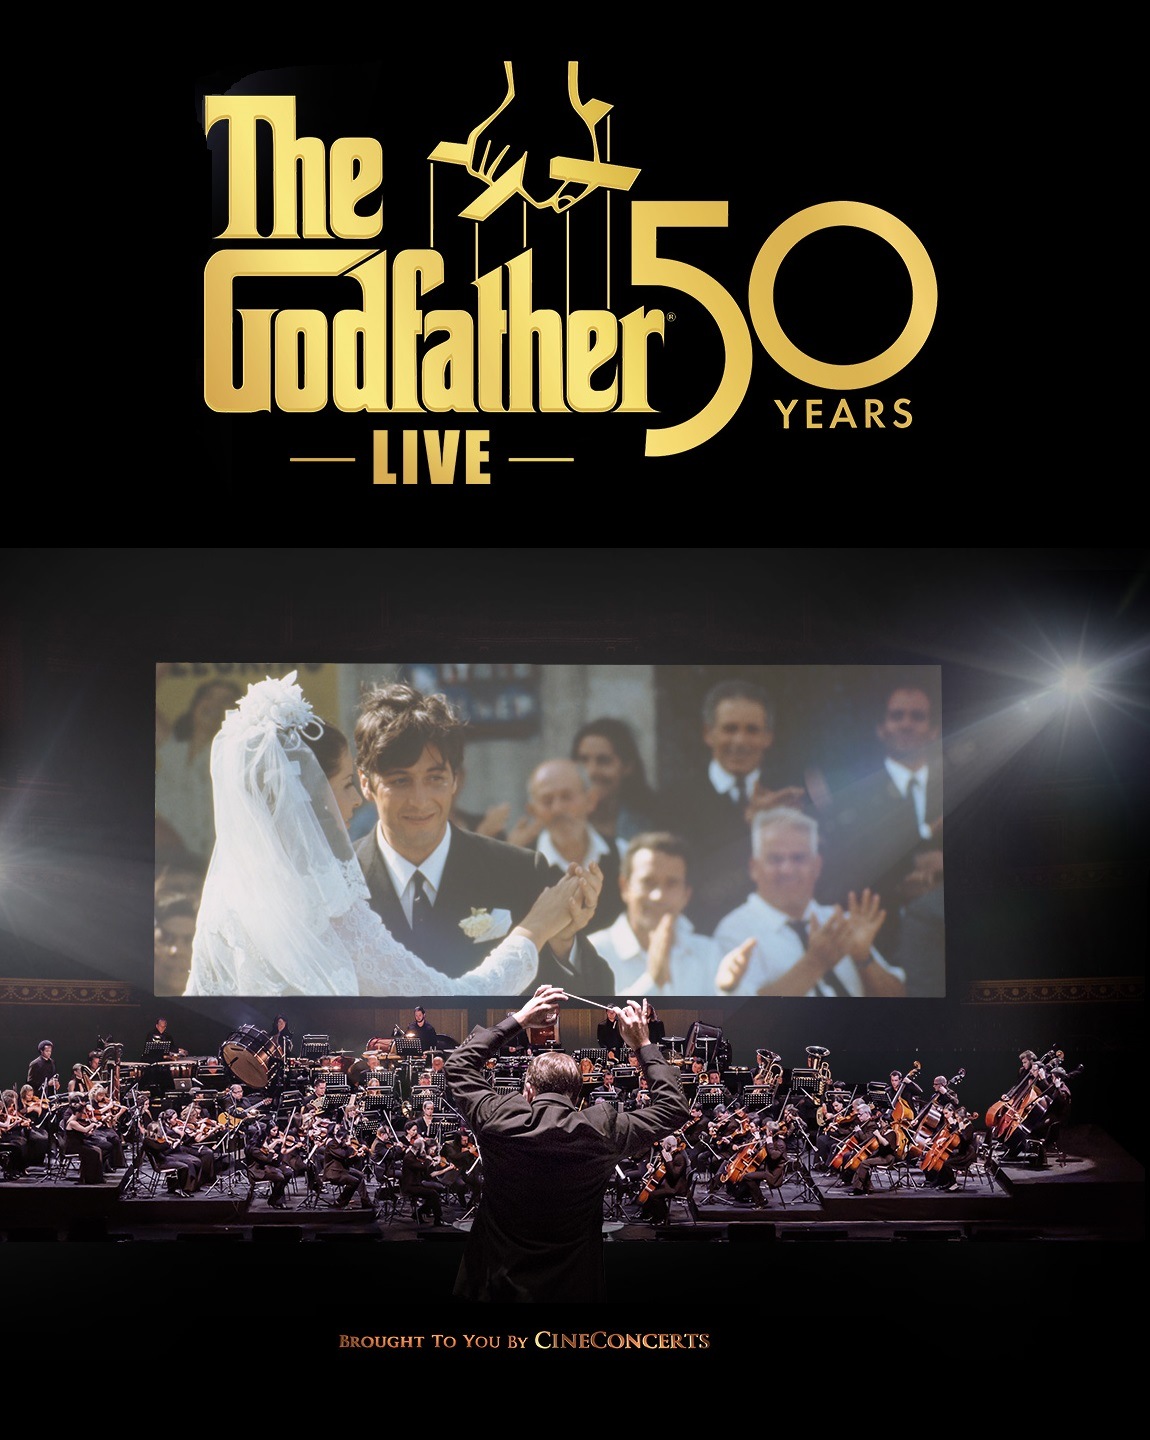 Movie 'The Godfather' in Concert – 50th anniversary – SoundTrackFest